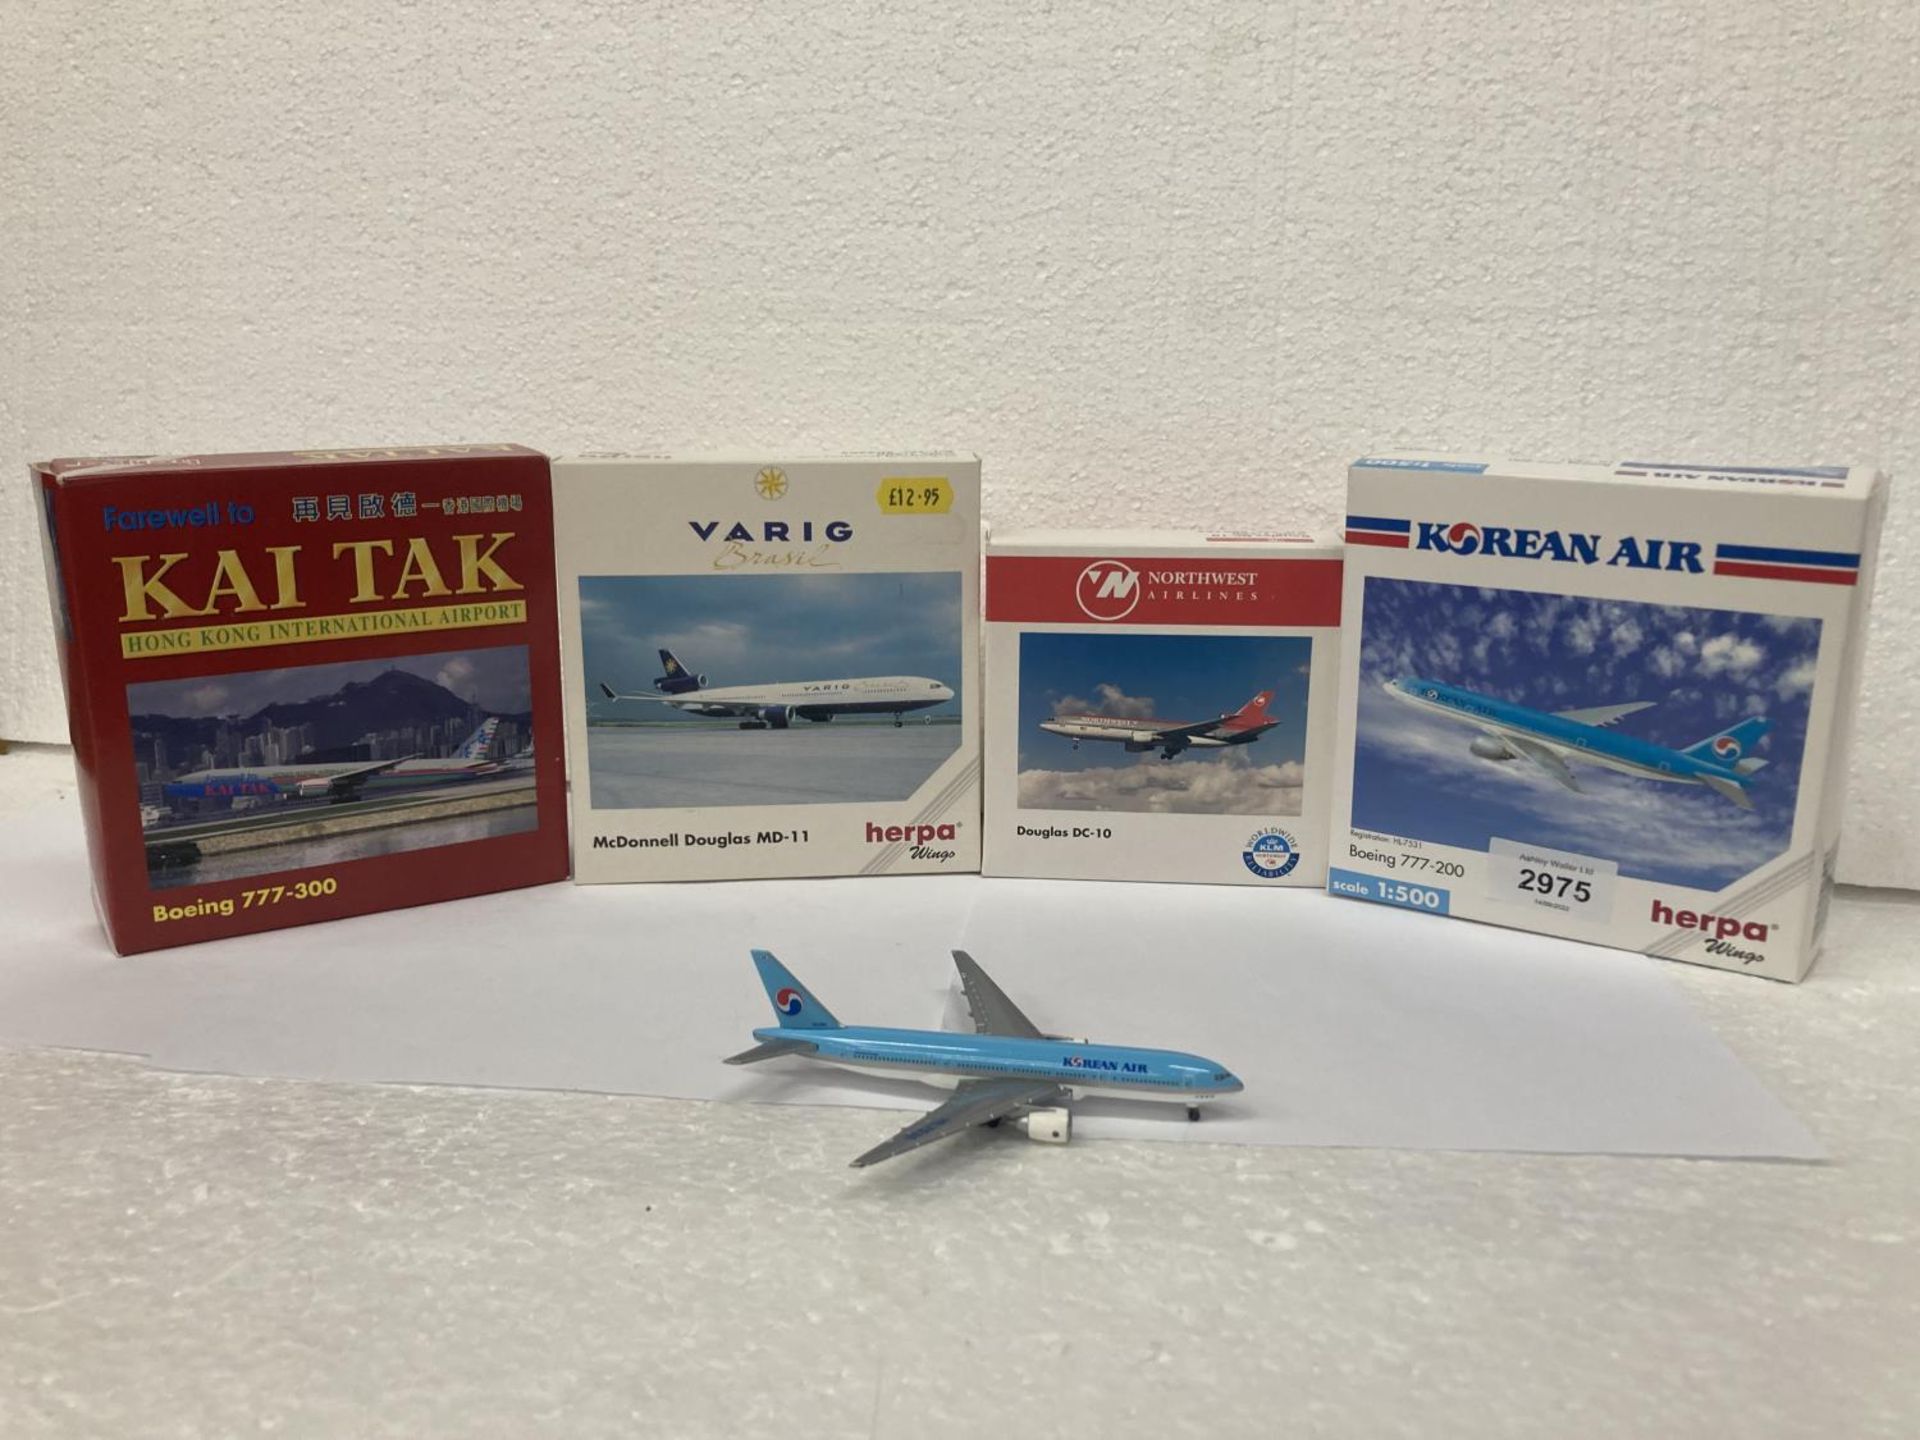 FOUR HERPA WINGS COLLECTION PLANES TO INCLUDE - KOREAN AIR BOEING 777-200 NO. 506458, NORTHWEST